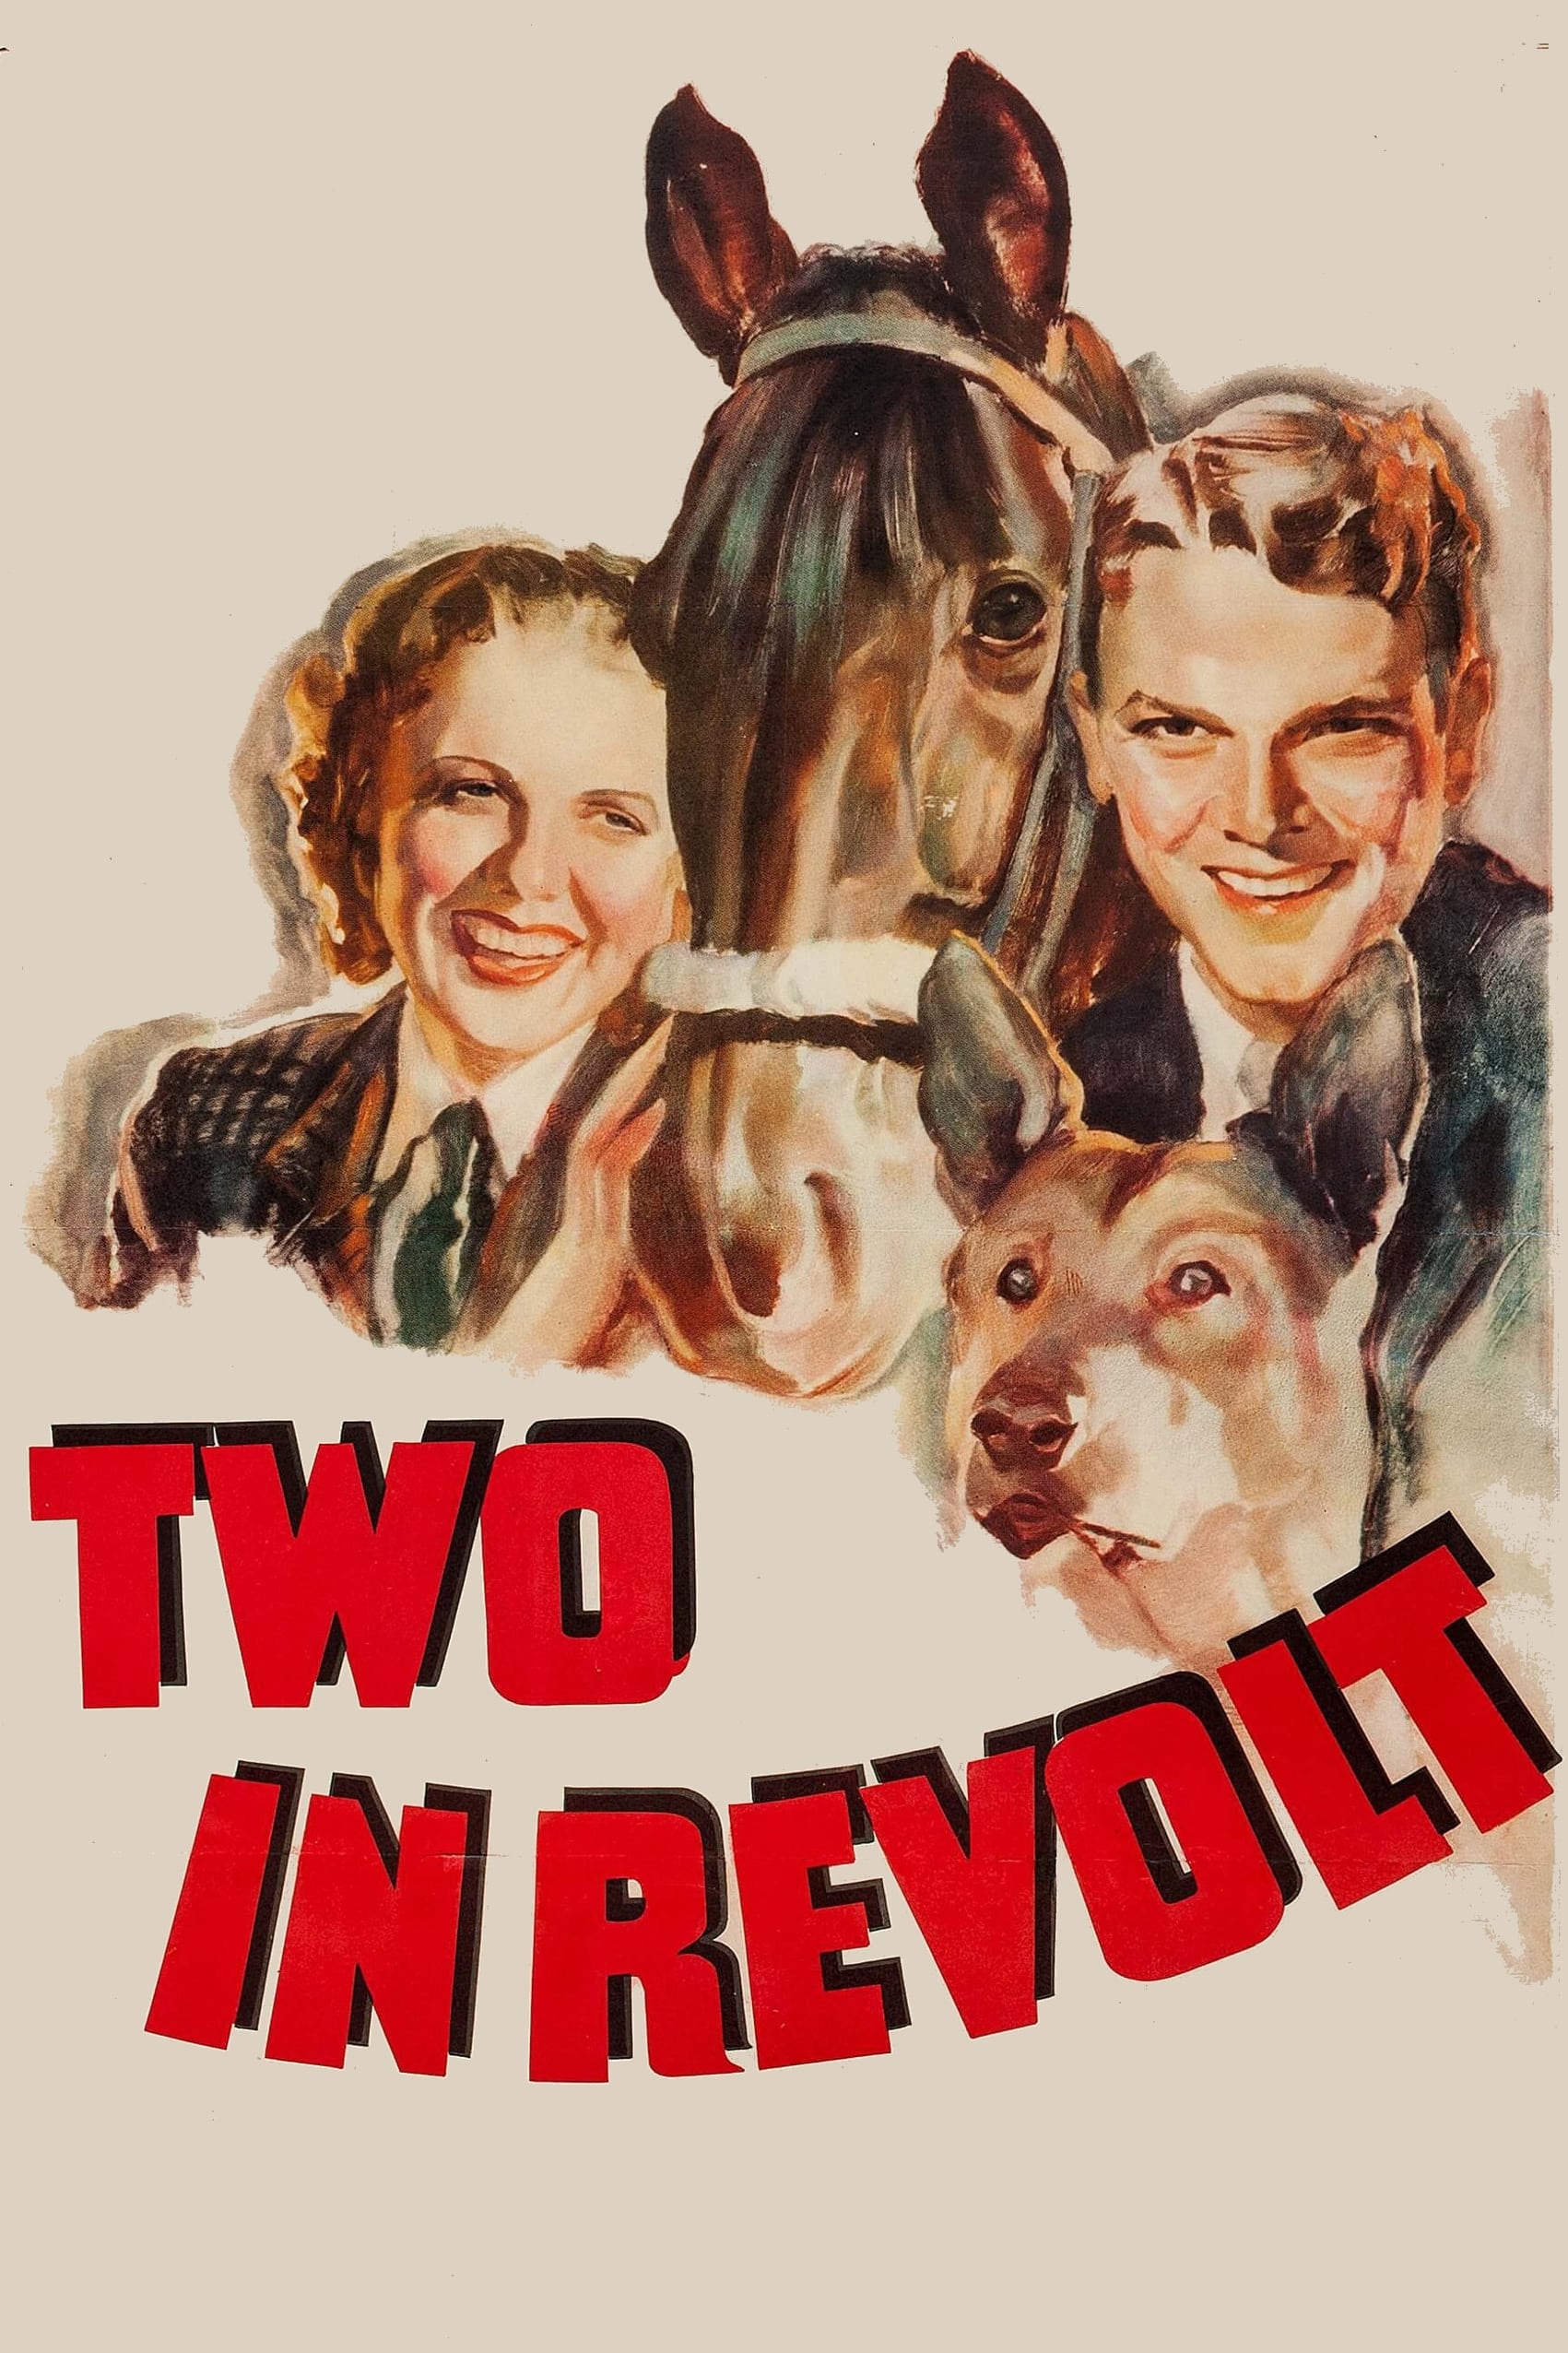 Two in Revolt (1936)